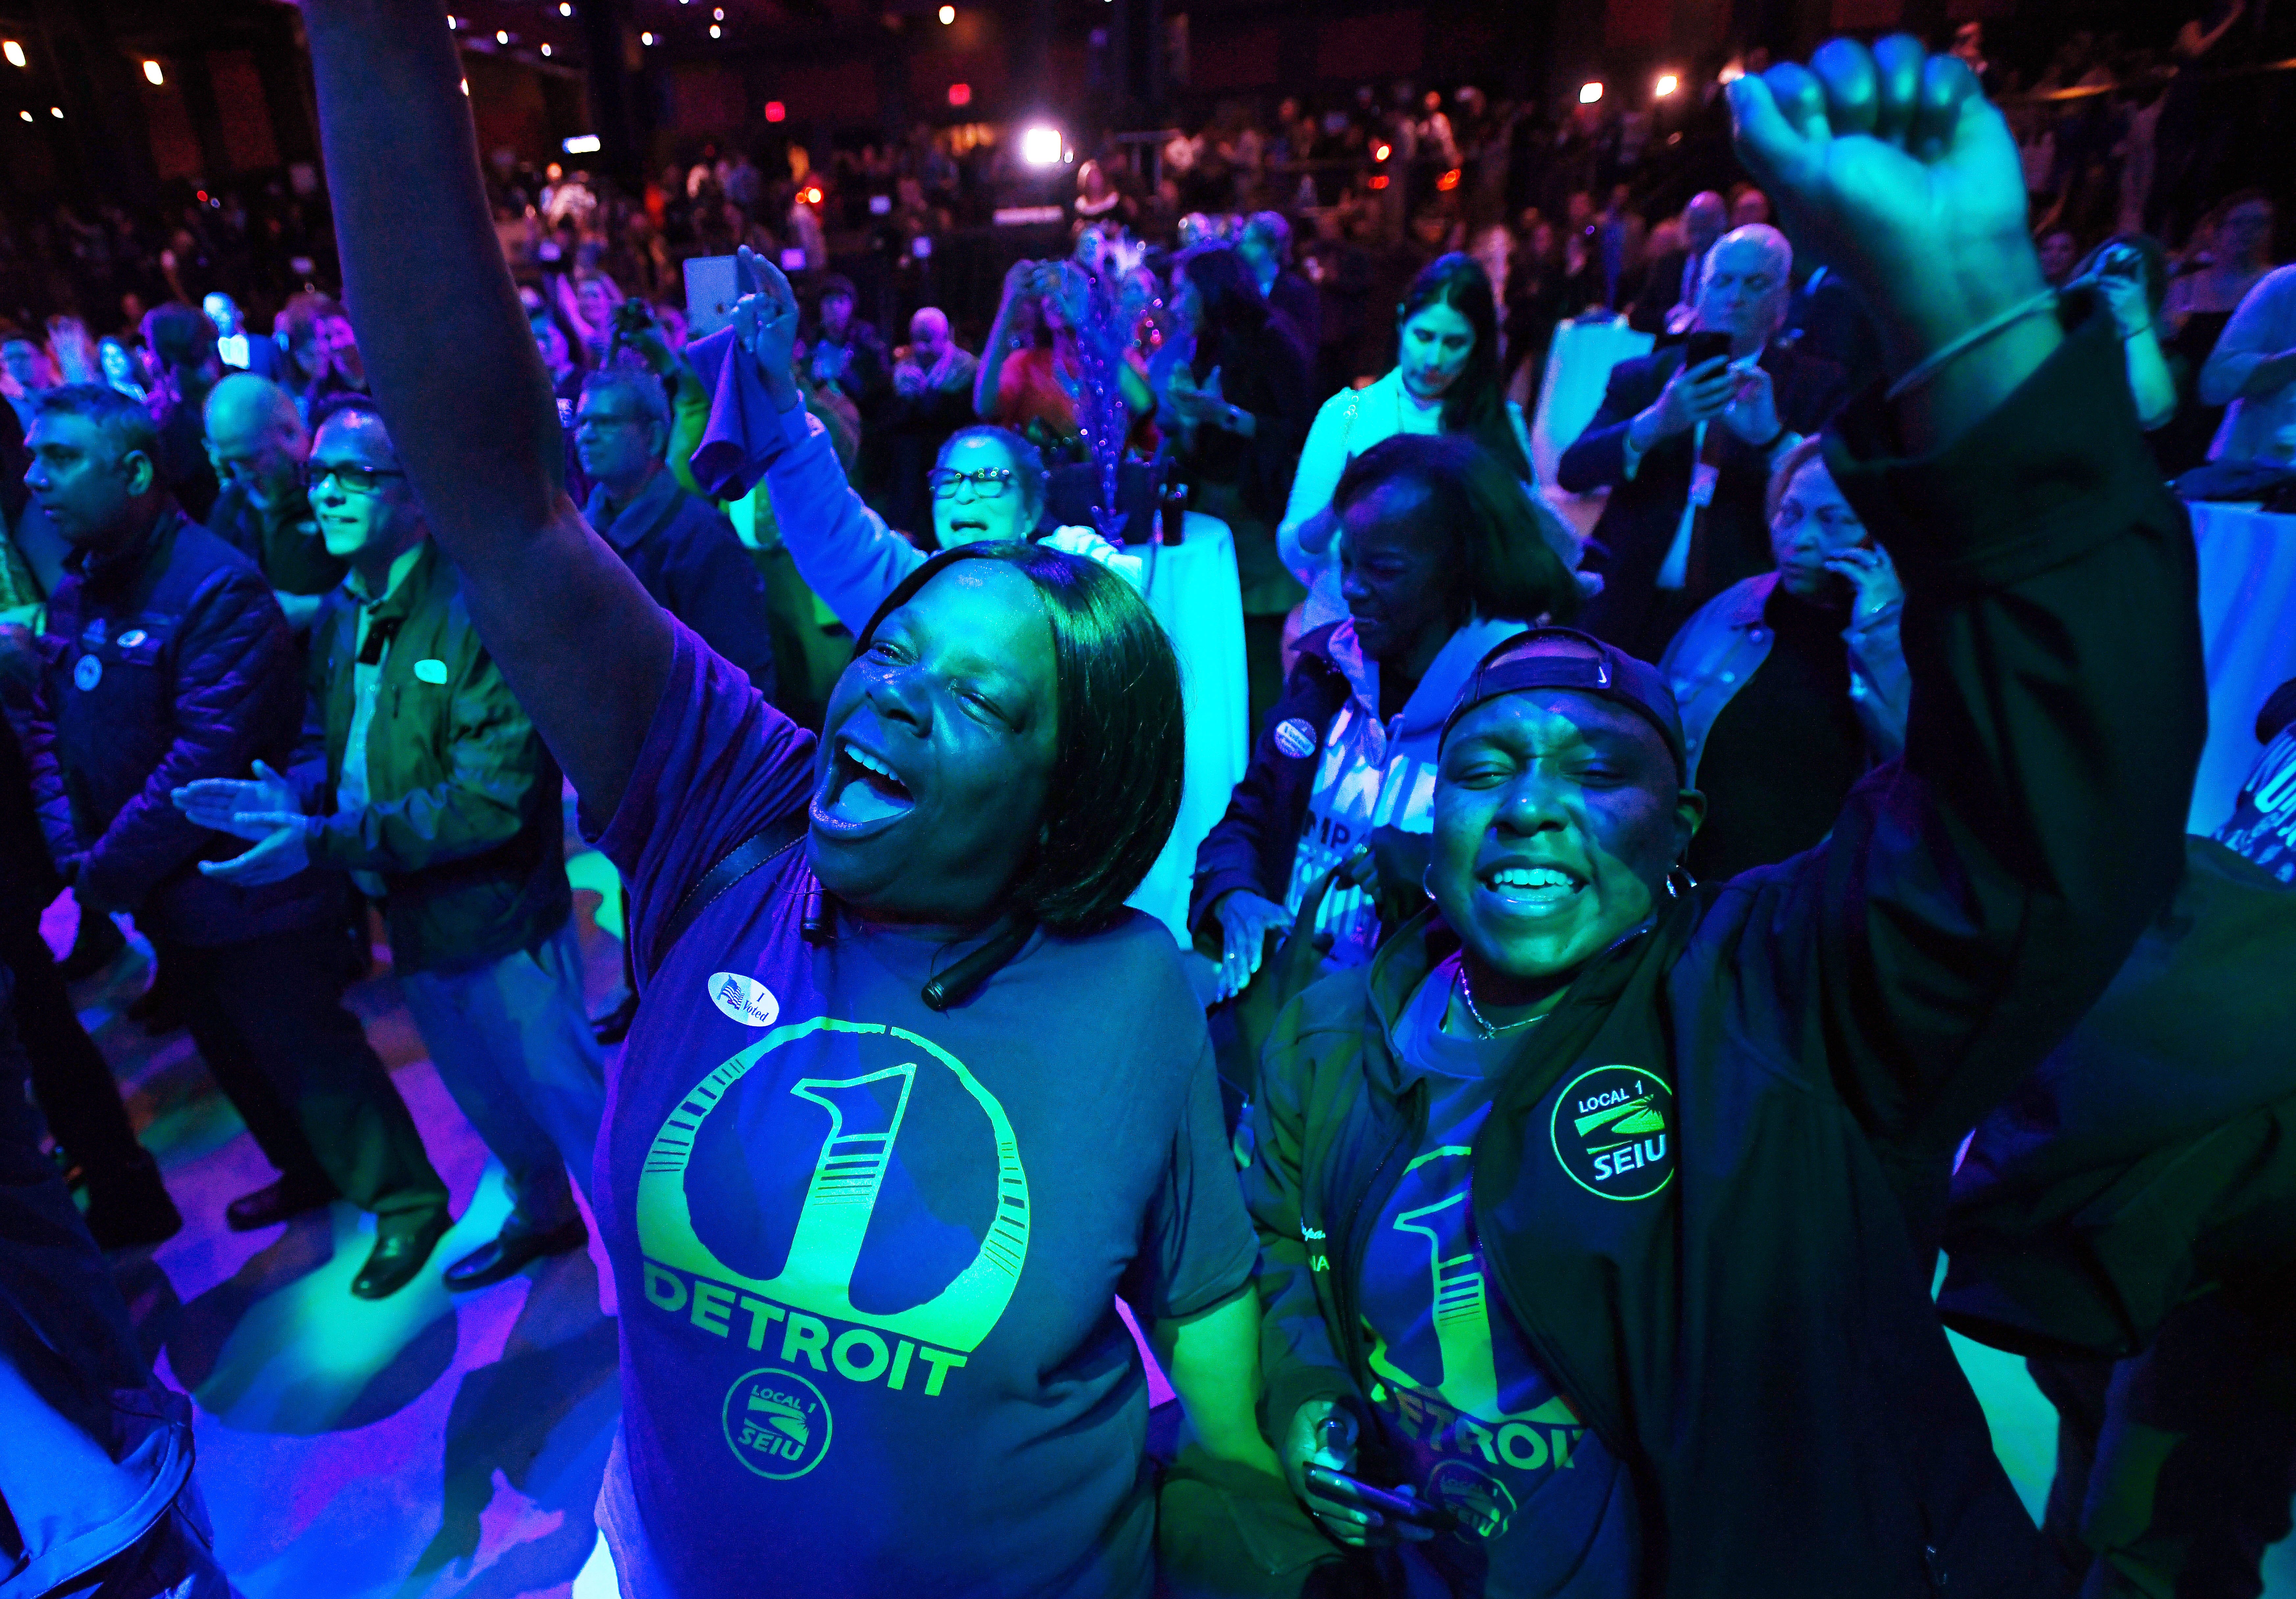 Kim Williams and Paulette Compass, both with SEIU, cheer as Detroit Mayor Mike Duggan tells the Democratic crowd at MotorCity Casino's Sound Board that  Michigan gubernatorial candidate Gretchen Whitmer is in the lead in the early results.